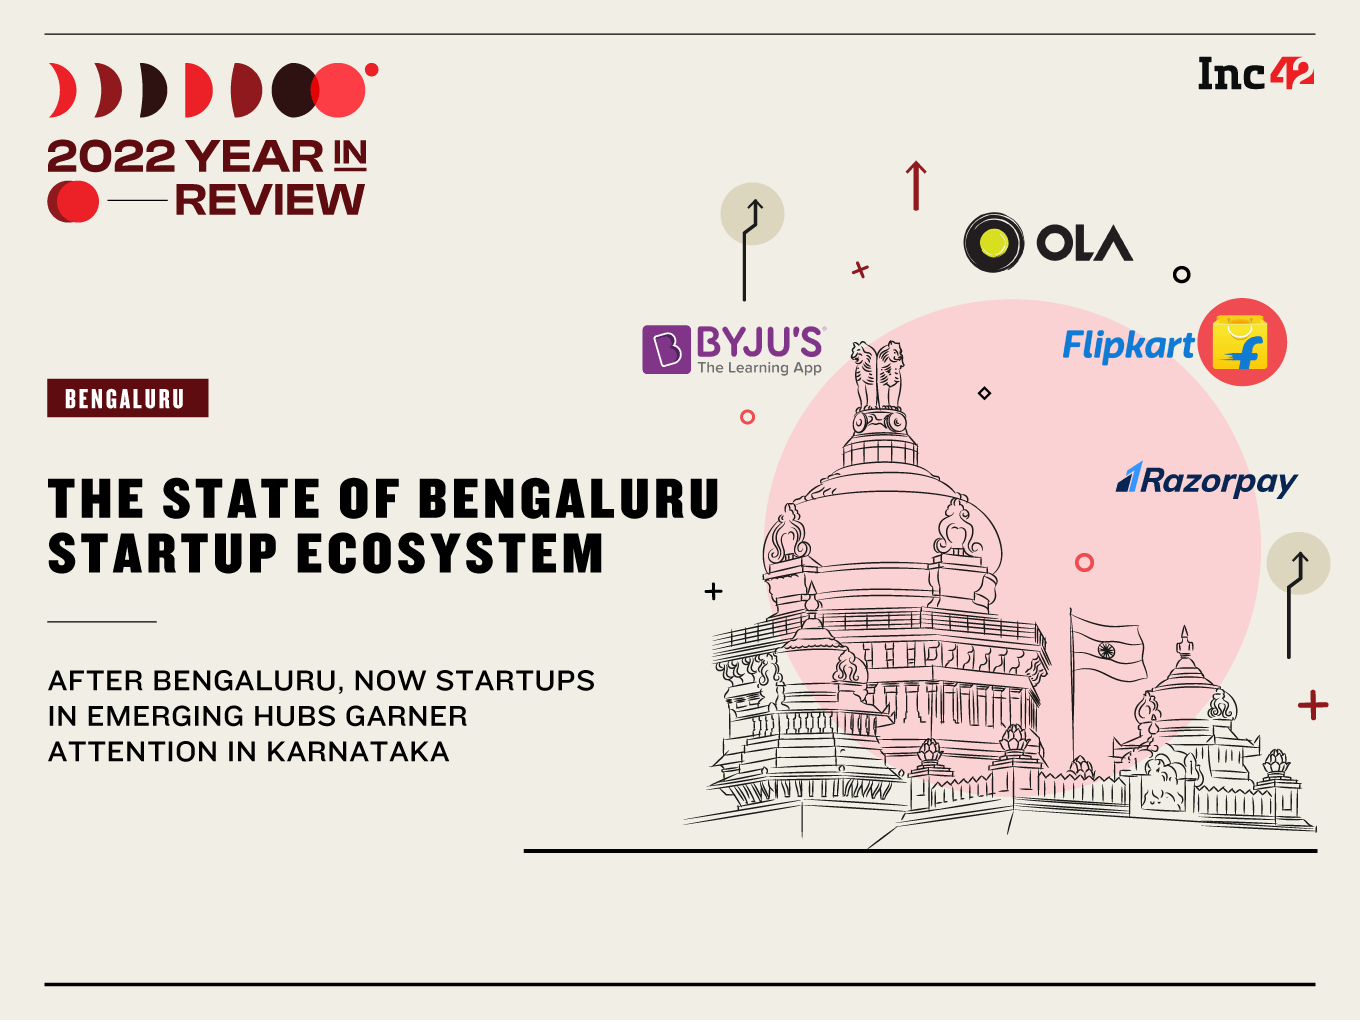 23 Startup Companies in Bangalore to Know